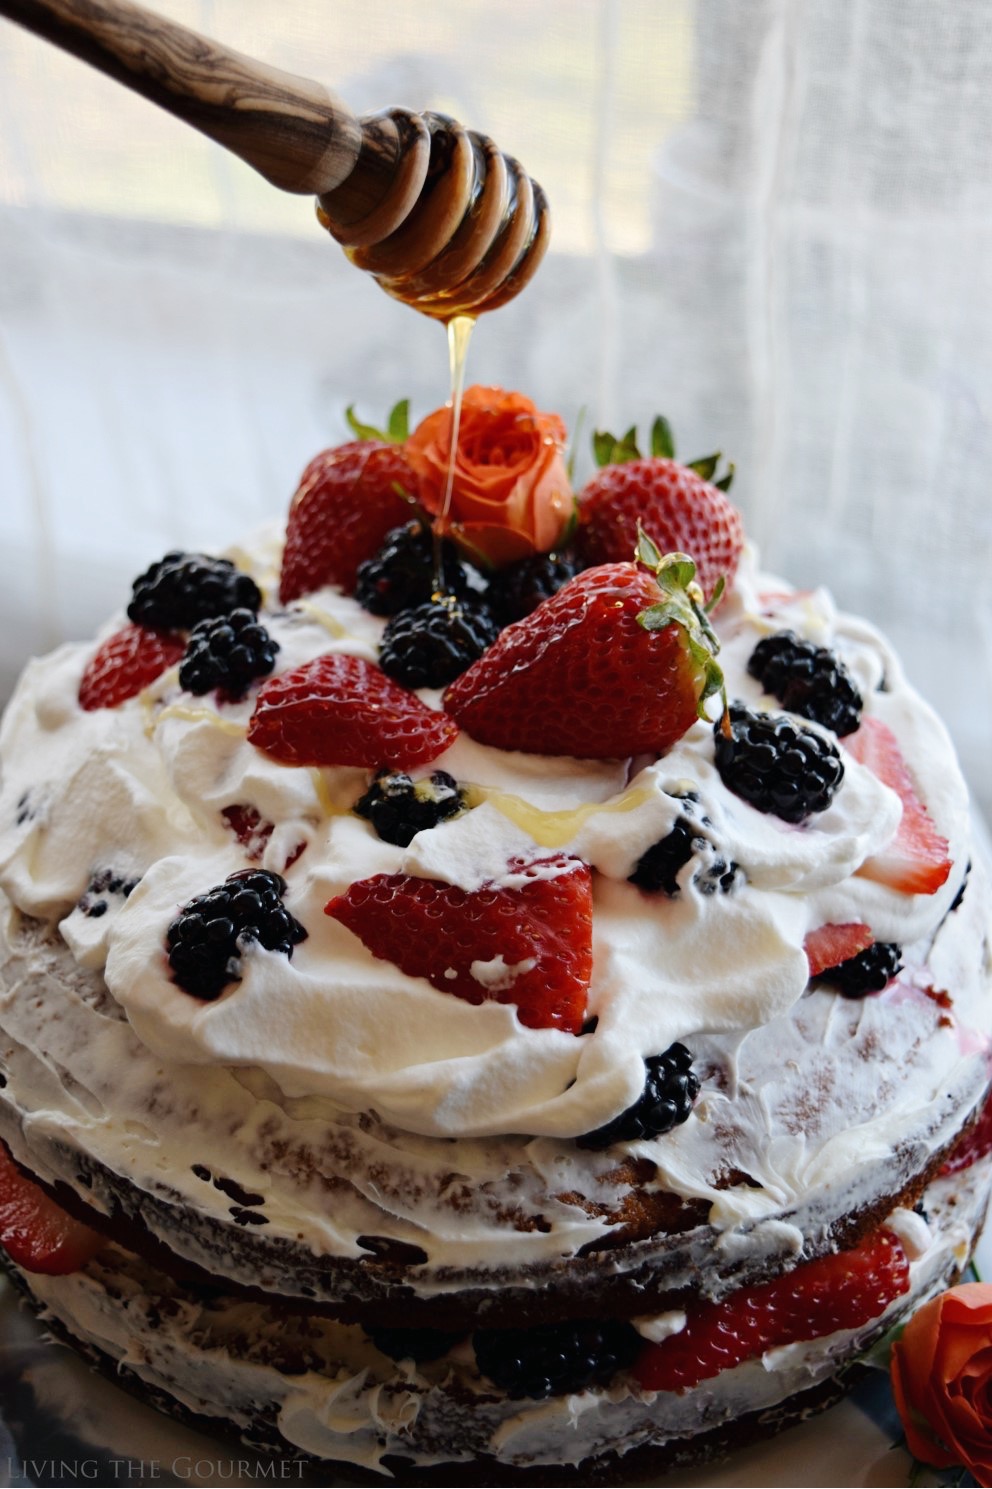 Living the Gourmet: Honey Spice Cake with Whipped Cream and Berries